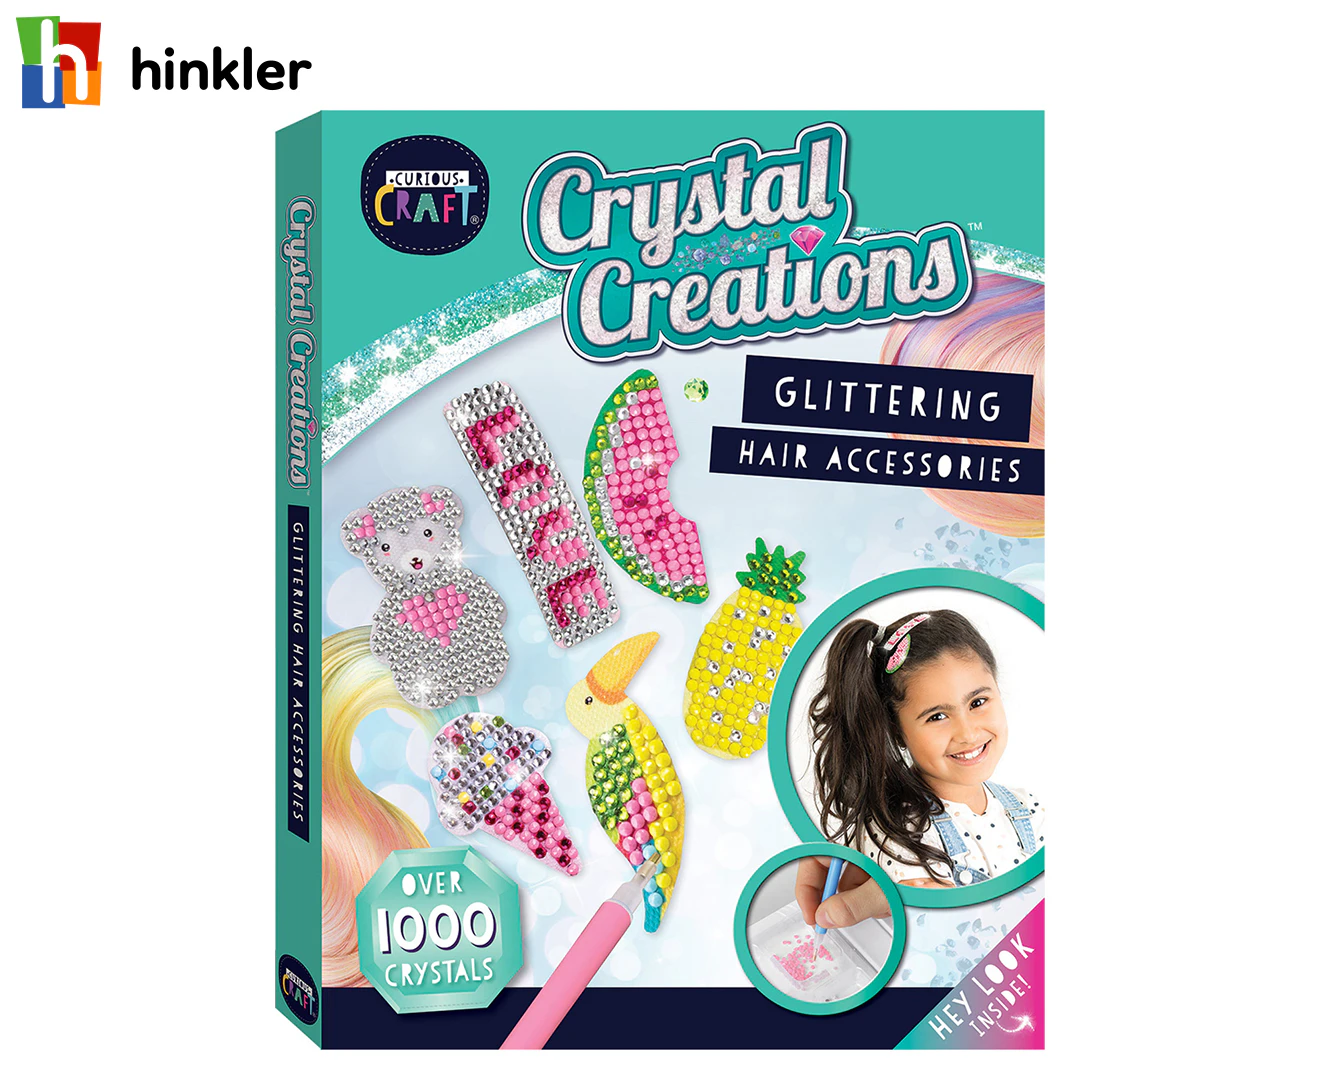 Hinkler Crystal Creations - Aldi — USA - Specials archive